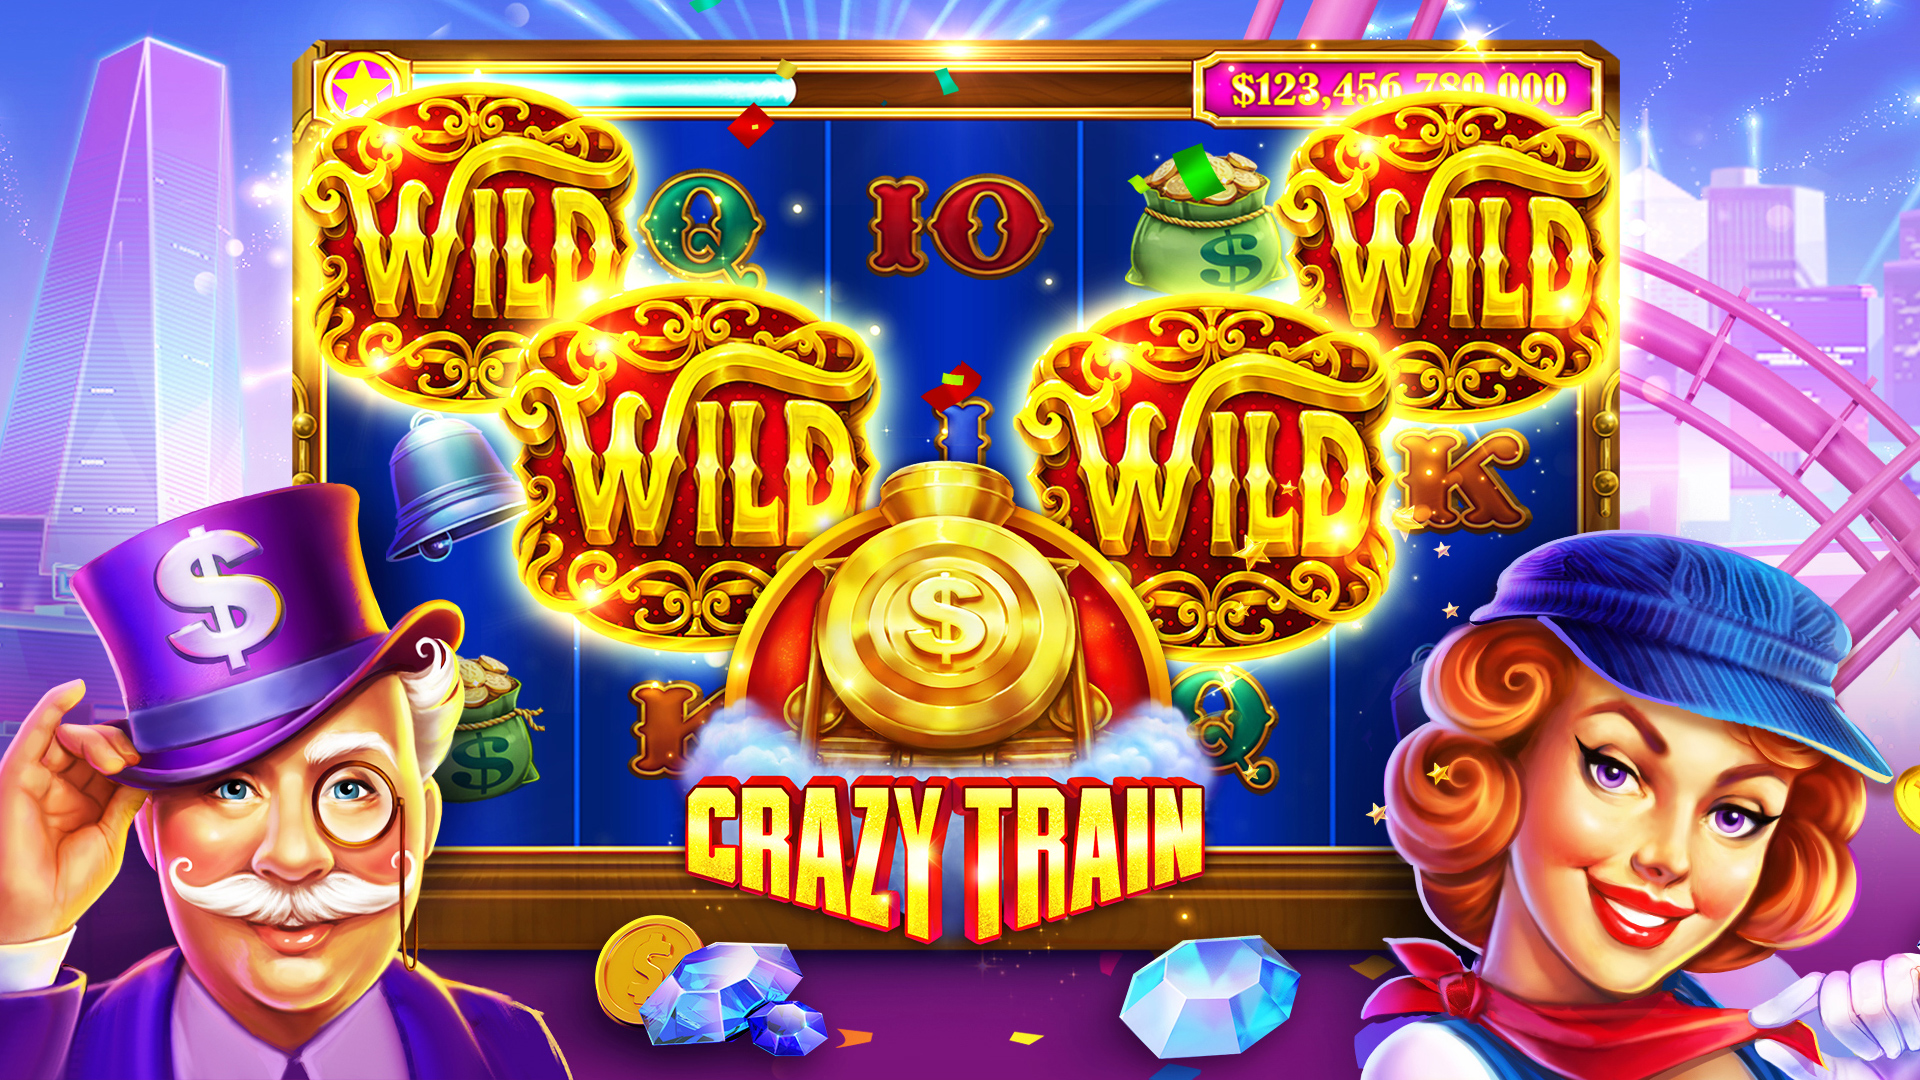 Play Online Slot Games At Coral Casino